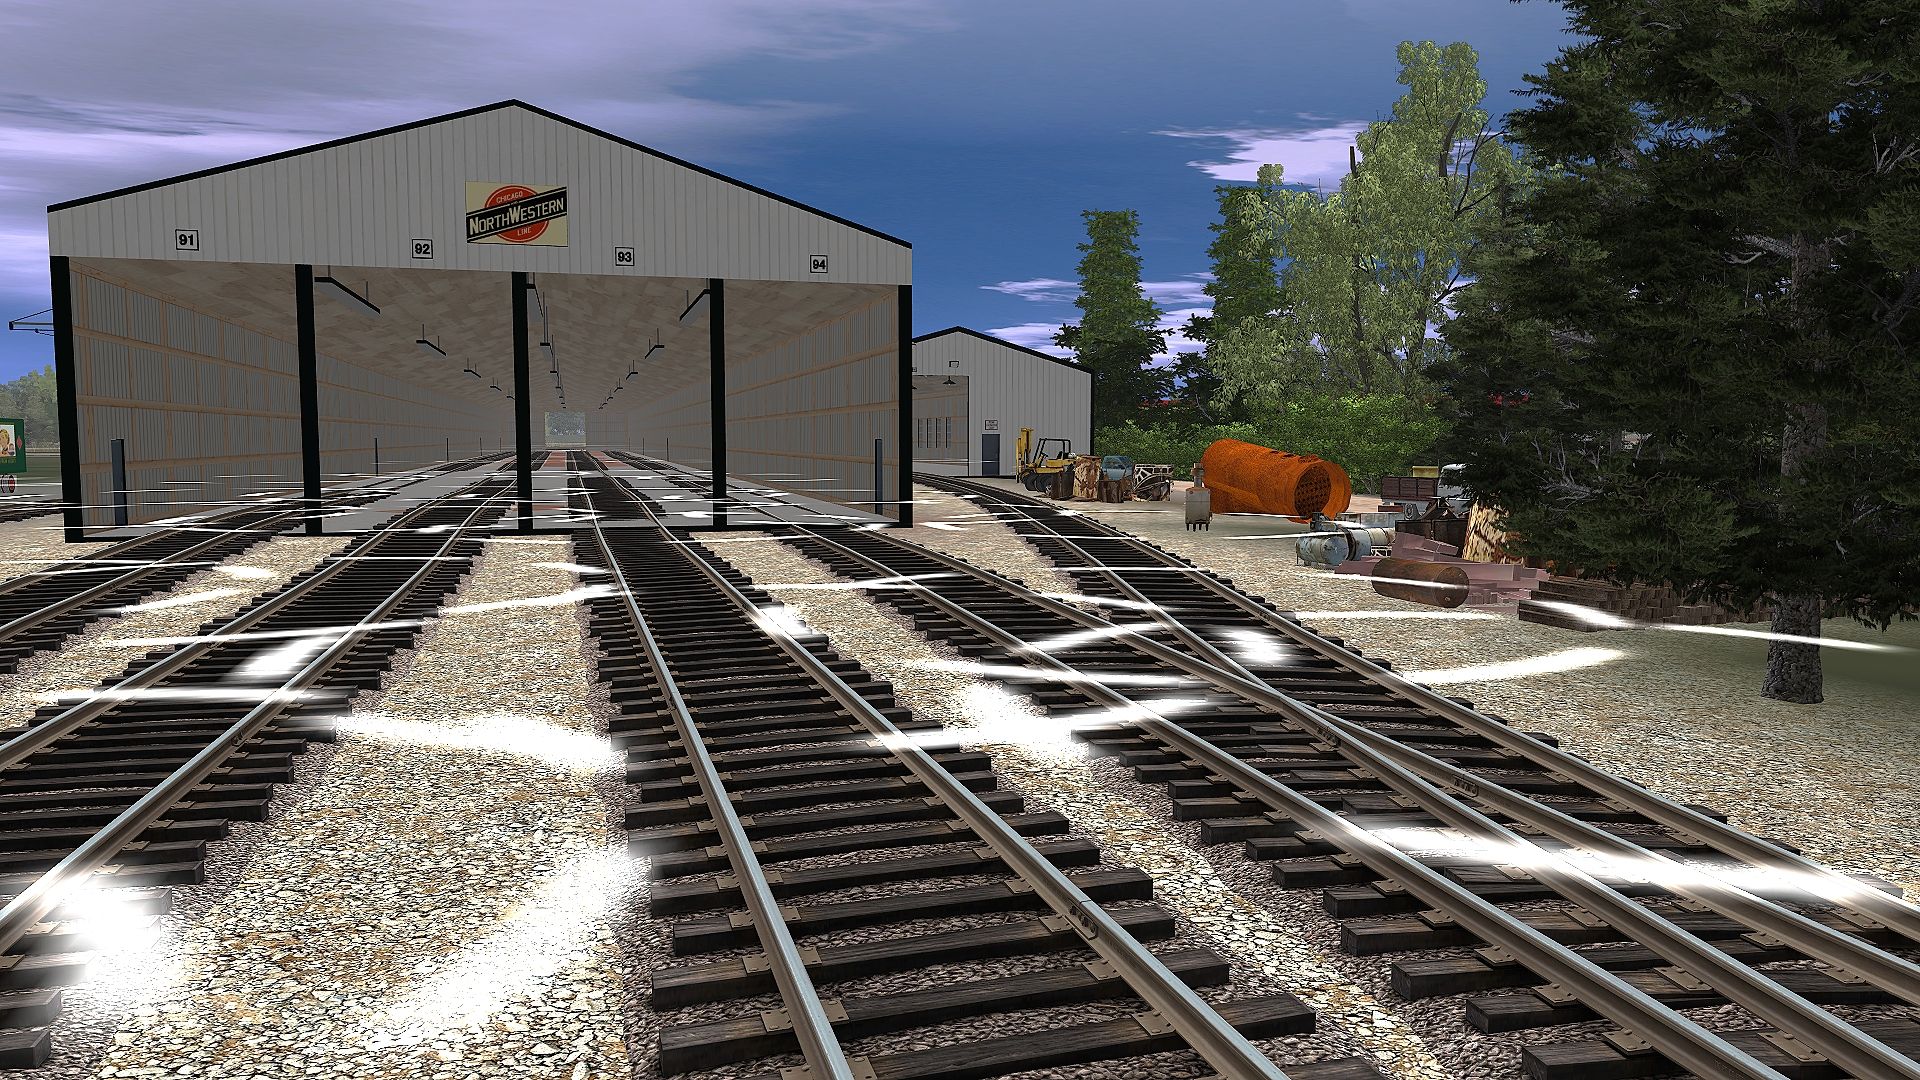 A-look-at-the-new-track-ballast-textures-over-by-Barn-9-and-the-Steam-Shop-on-my-IRM-route.jpg